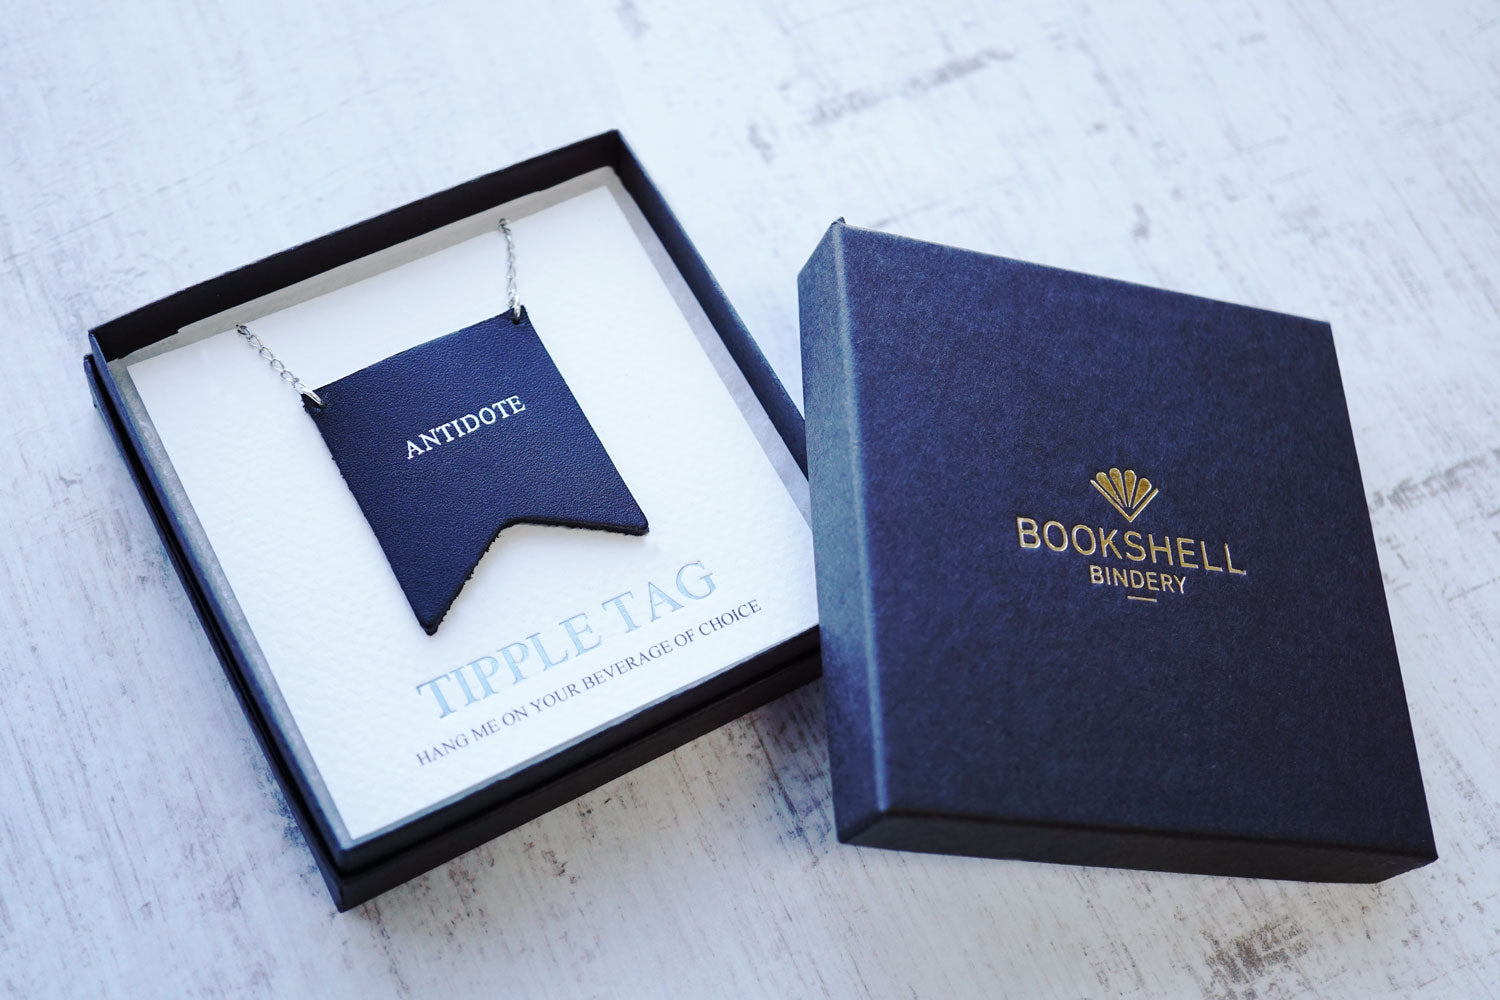 Custom decanter tags from Bookshell Bindery are ready to gift in a beautiful gift box